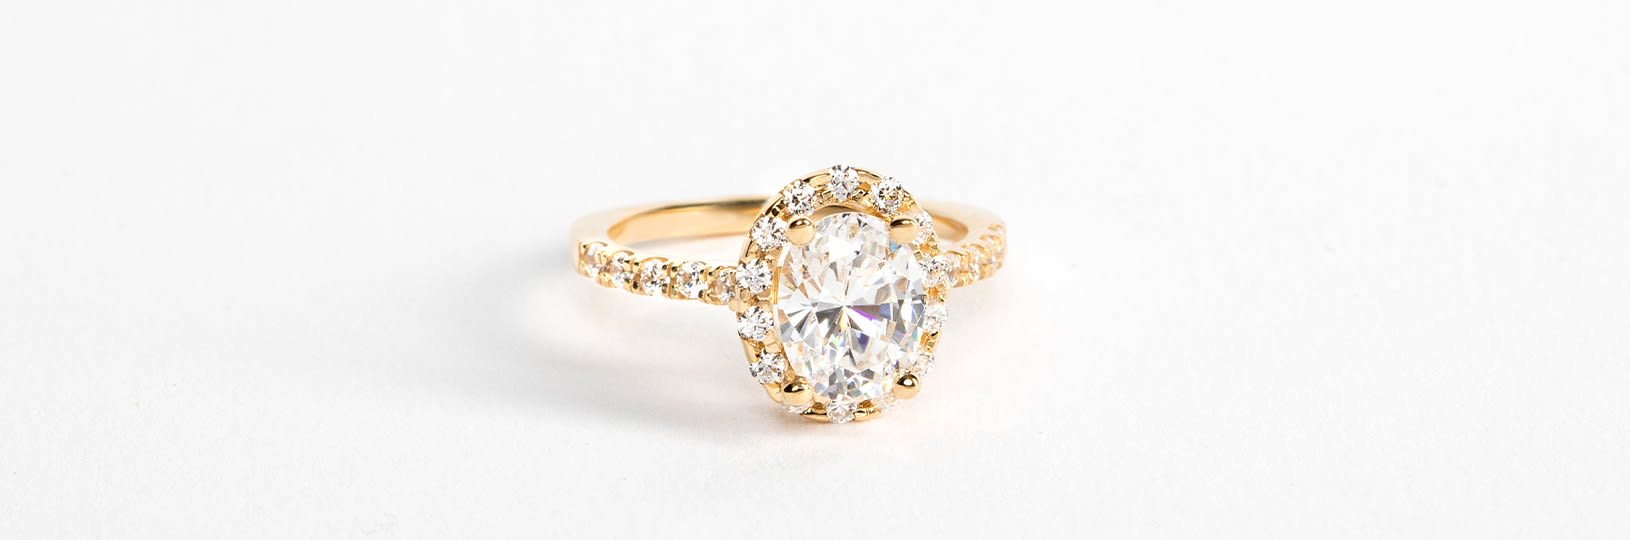 A halo engagement ring in a yellow gold setting